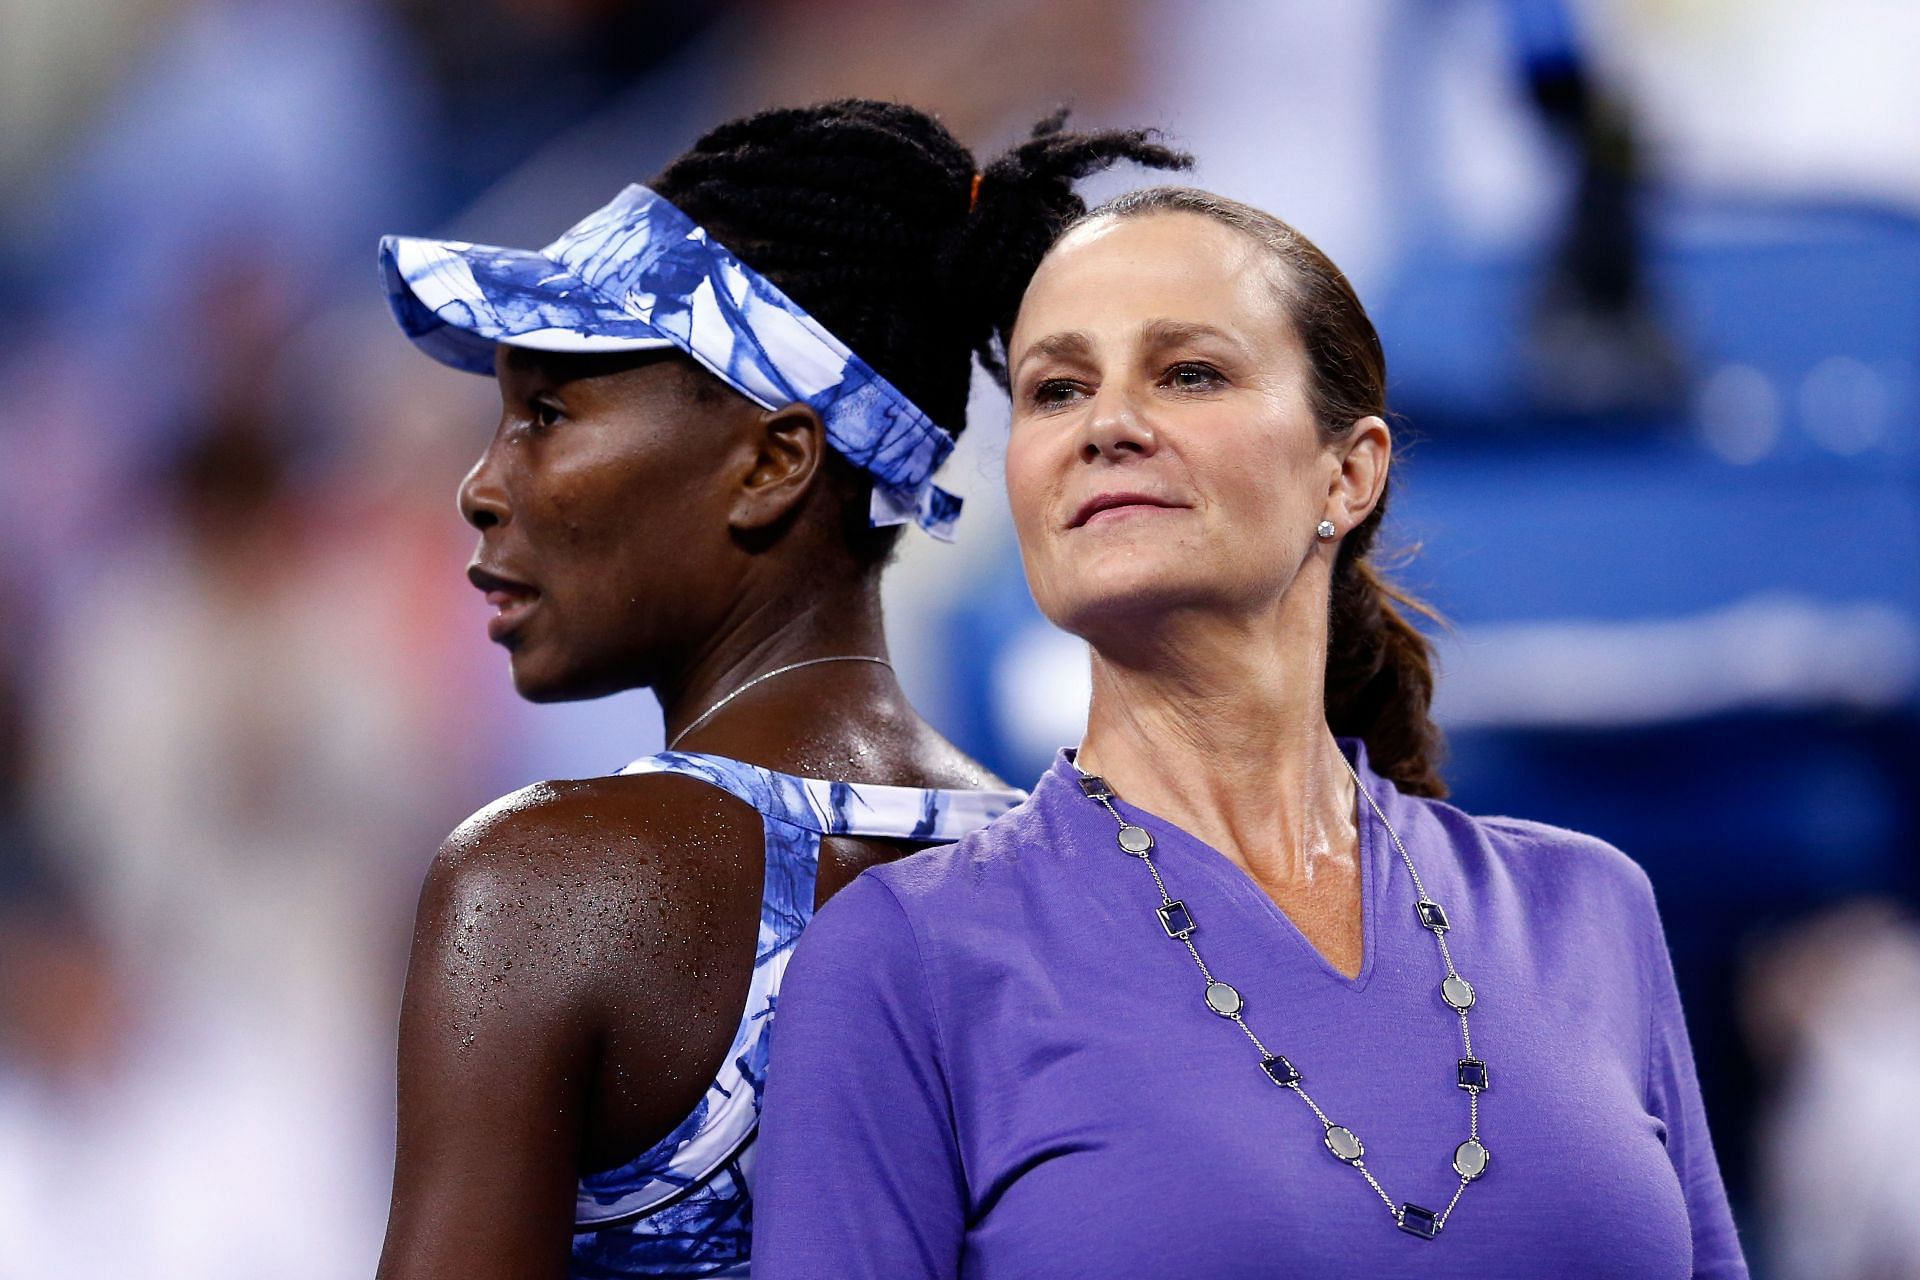 Pam Shriver is also currently a coach, working with Donna Vekic.